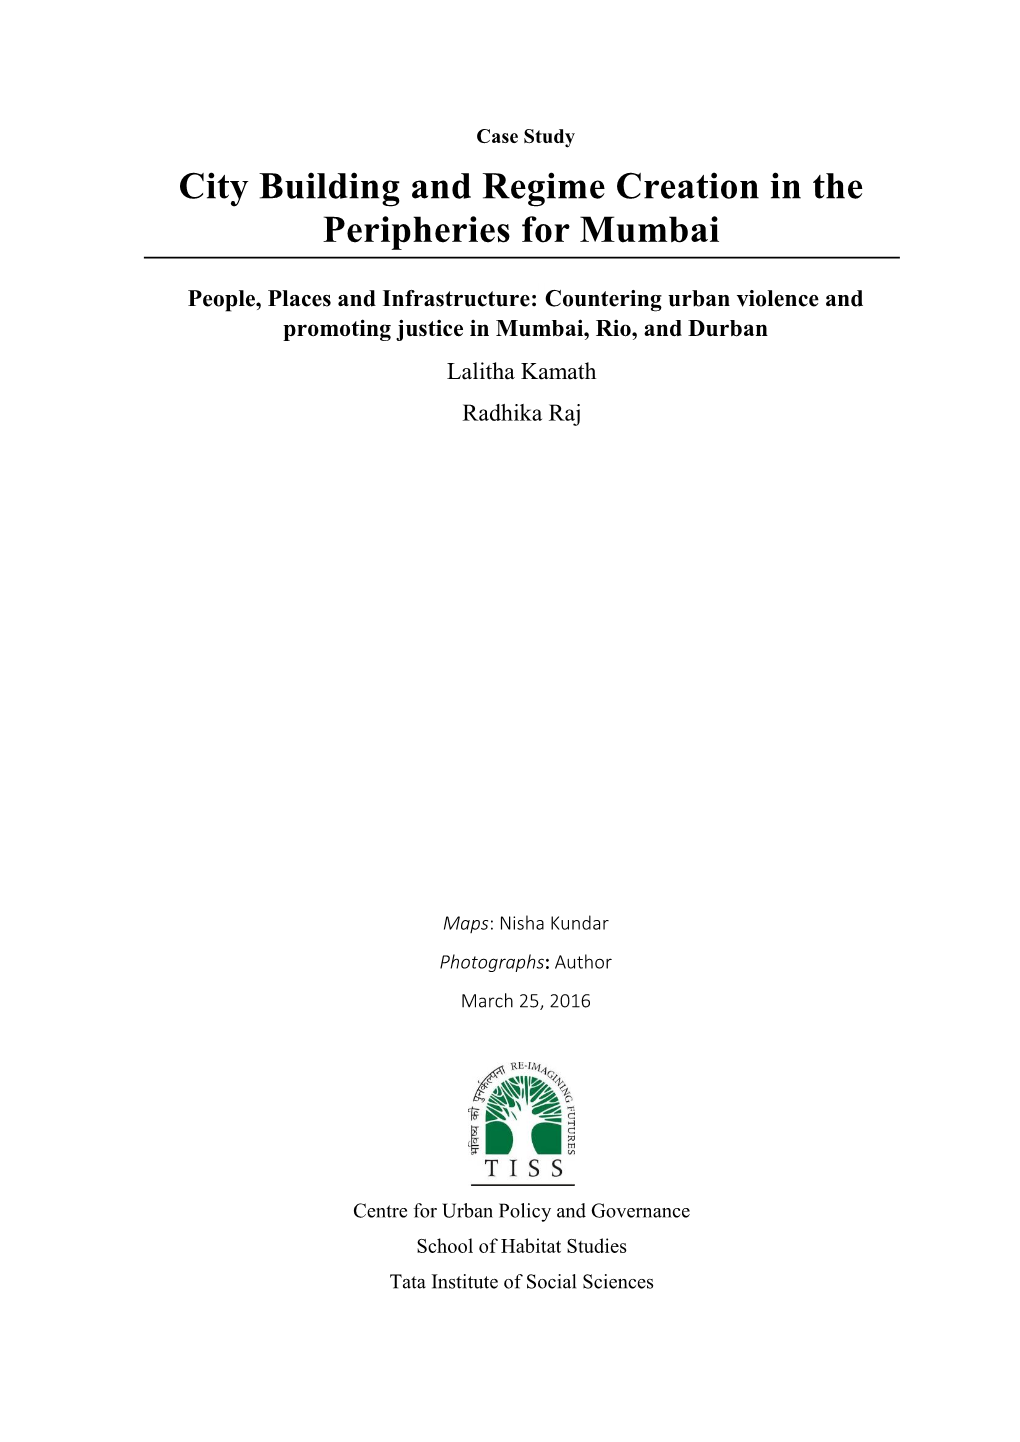 City Building and Regime Creation in the Peripheries for Mumbai